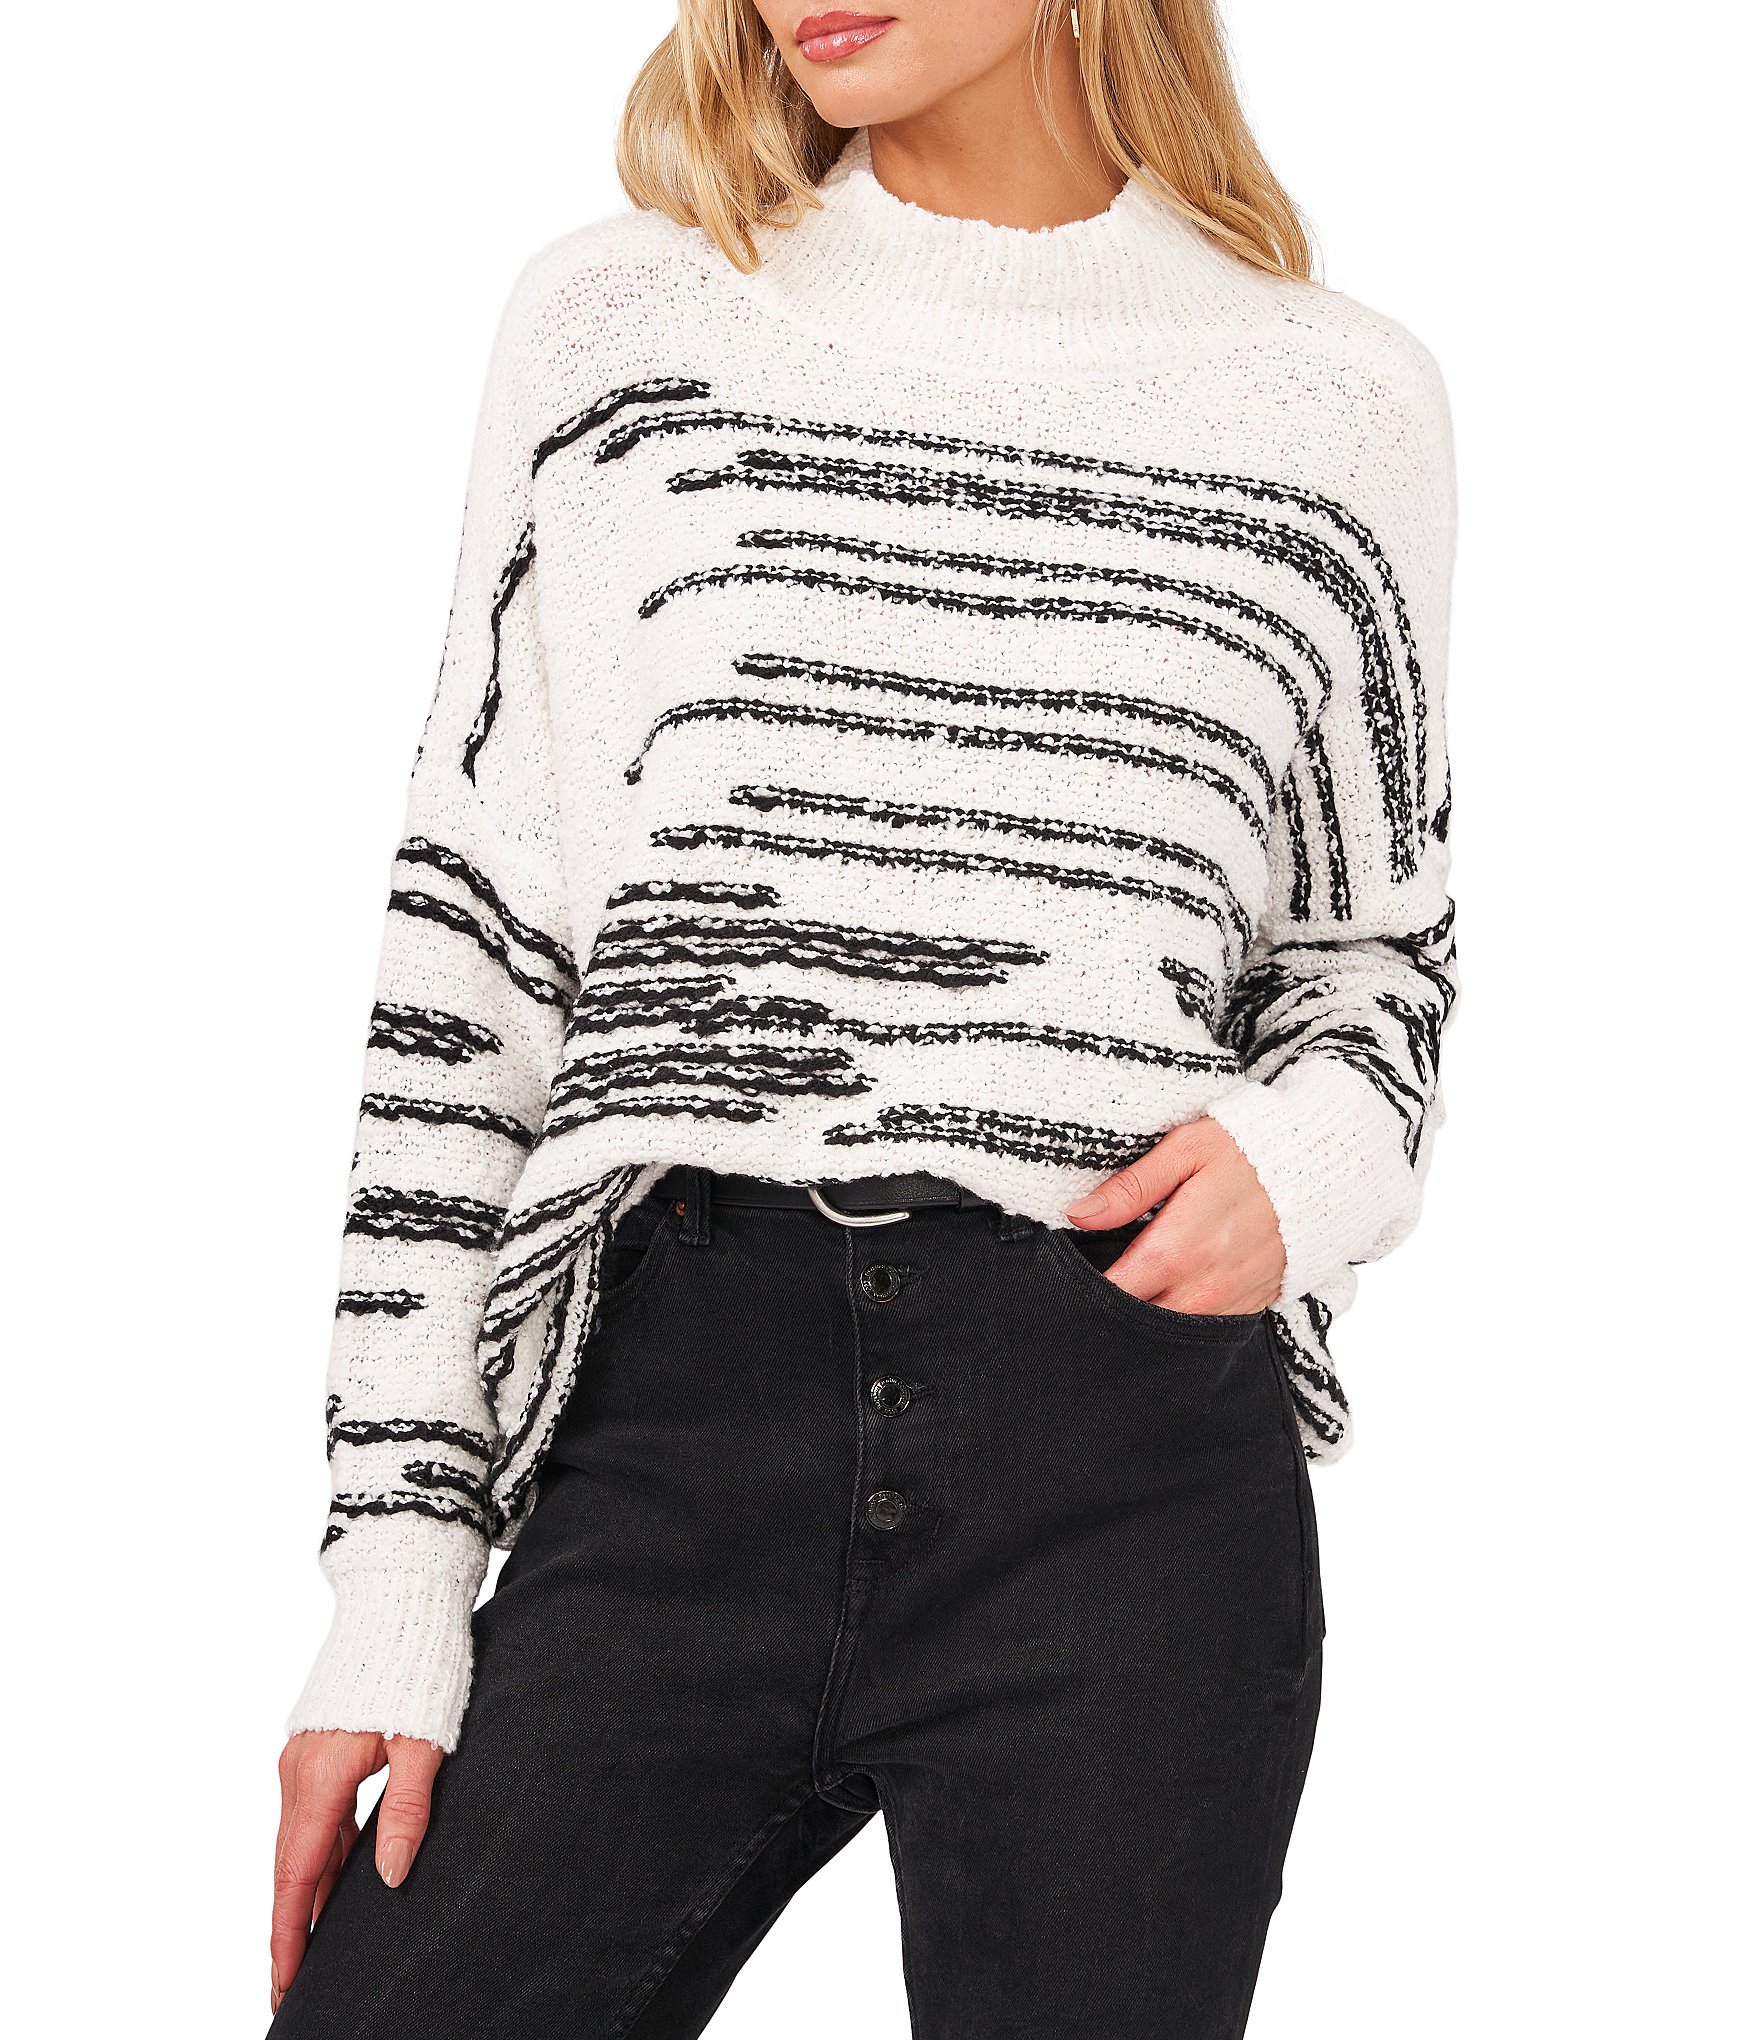 Black And White Sweater